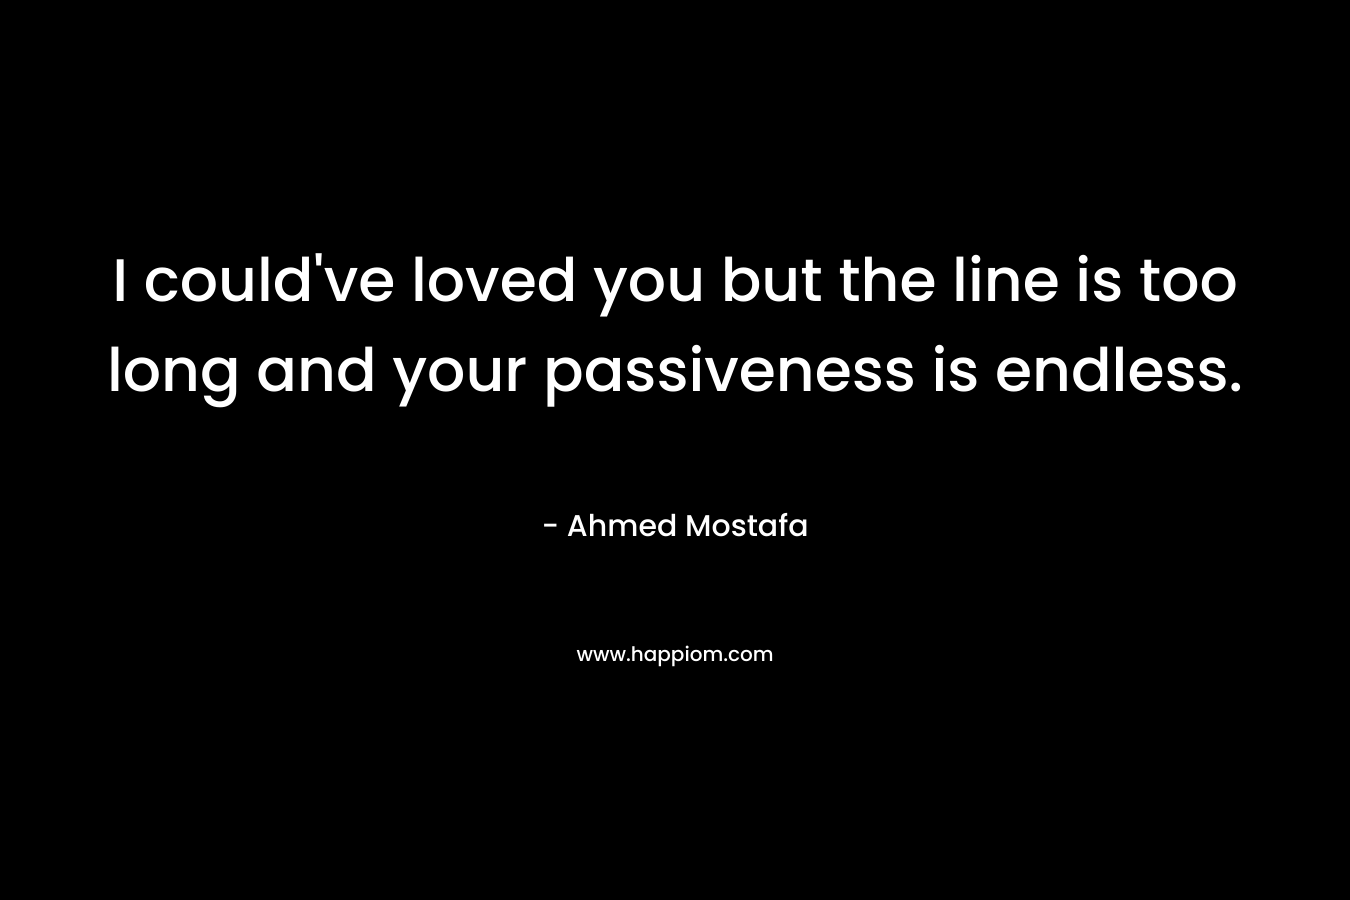 I could’ve loved you but the line is too long and your passiveness is endless. – Ahmed Mostafa